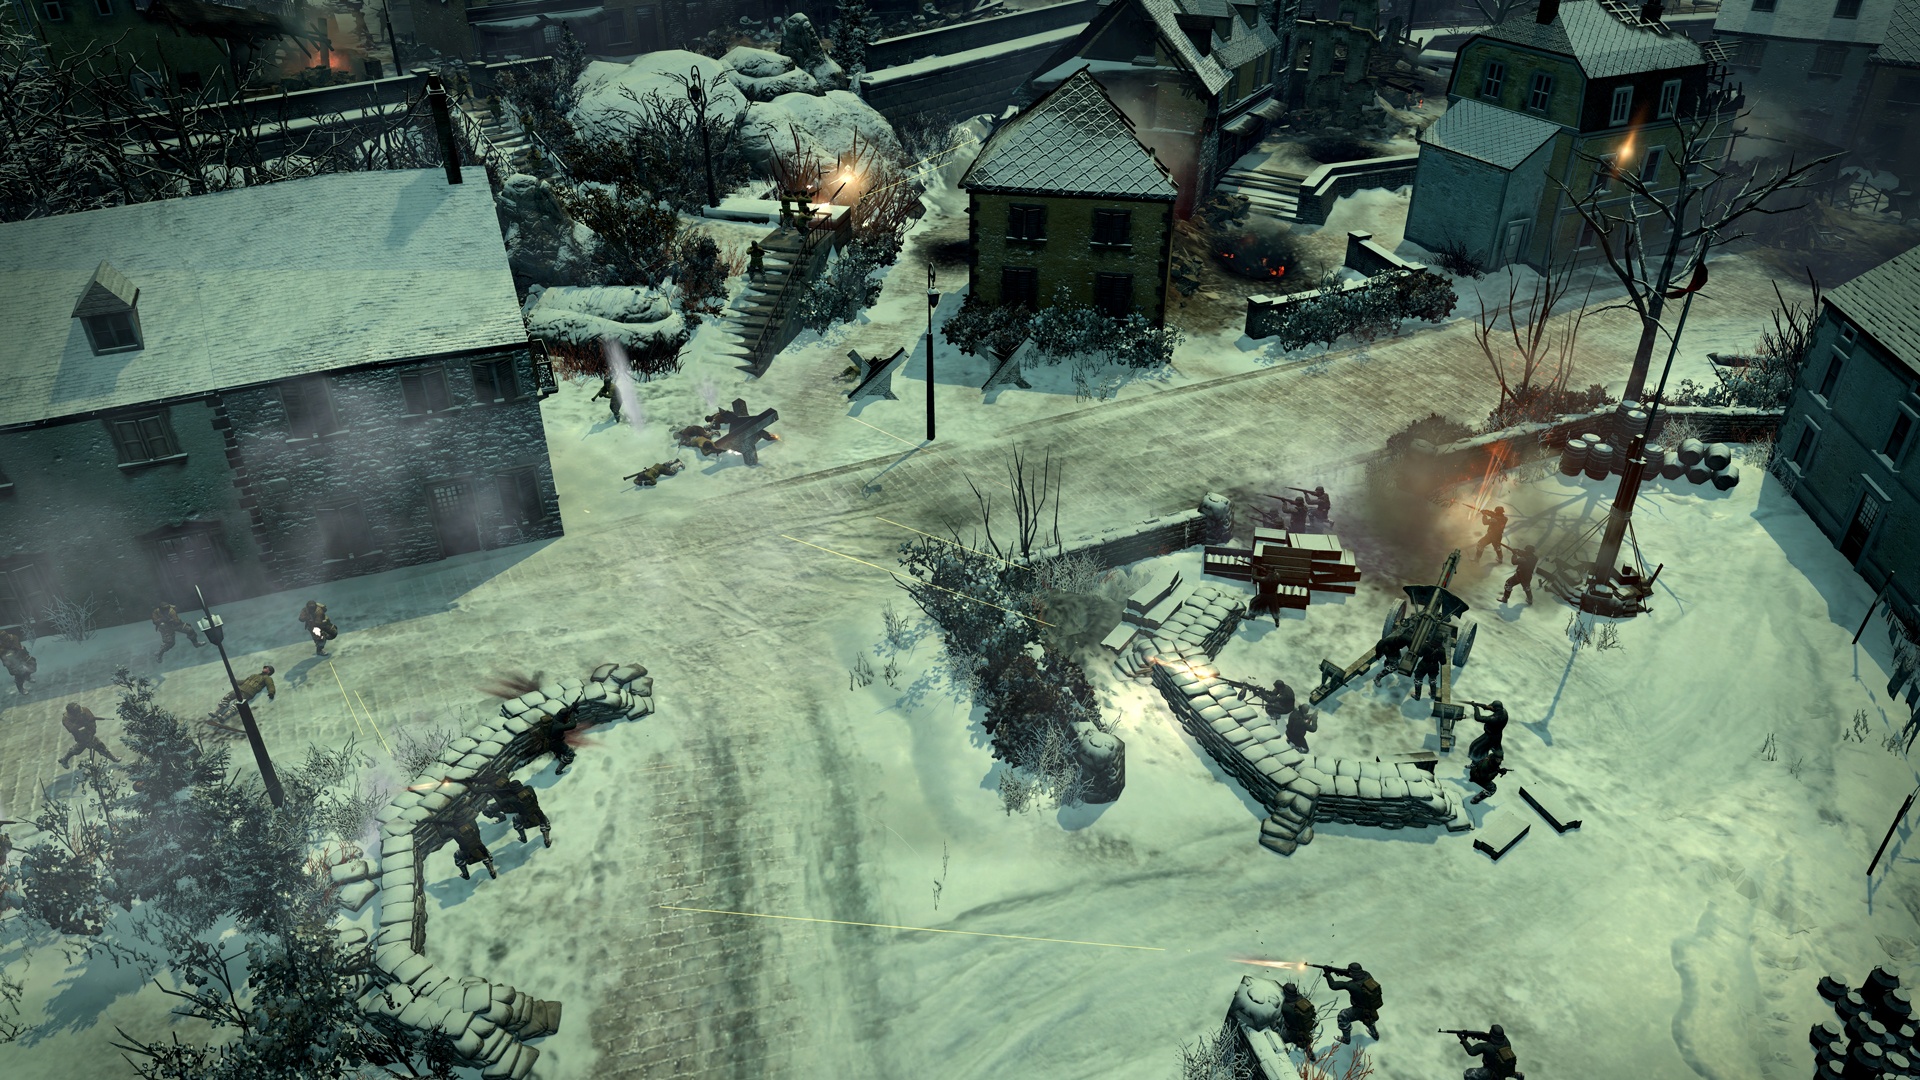 company of heroes 2 most powerful faction